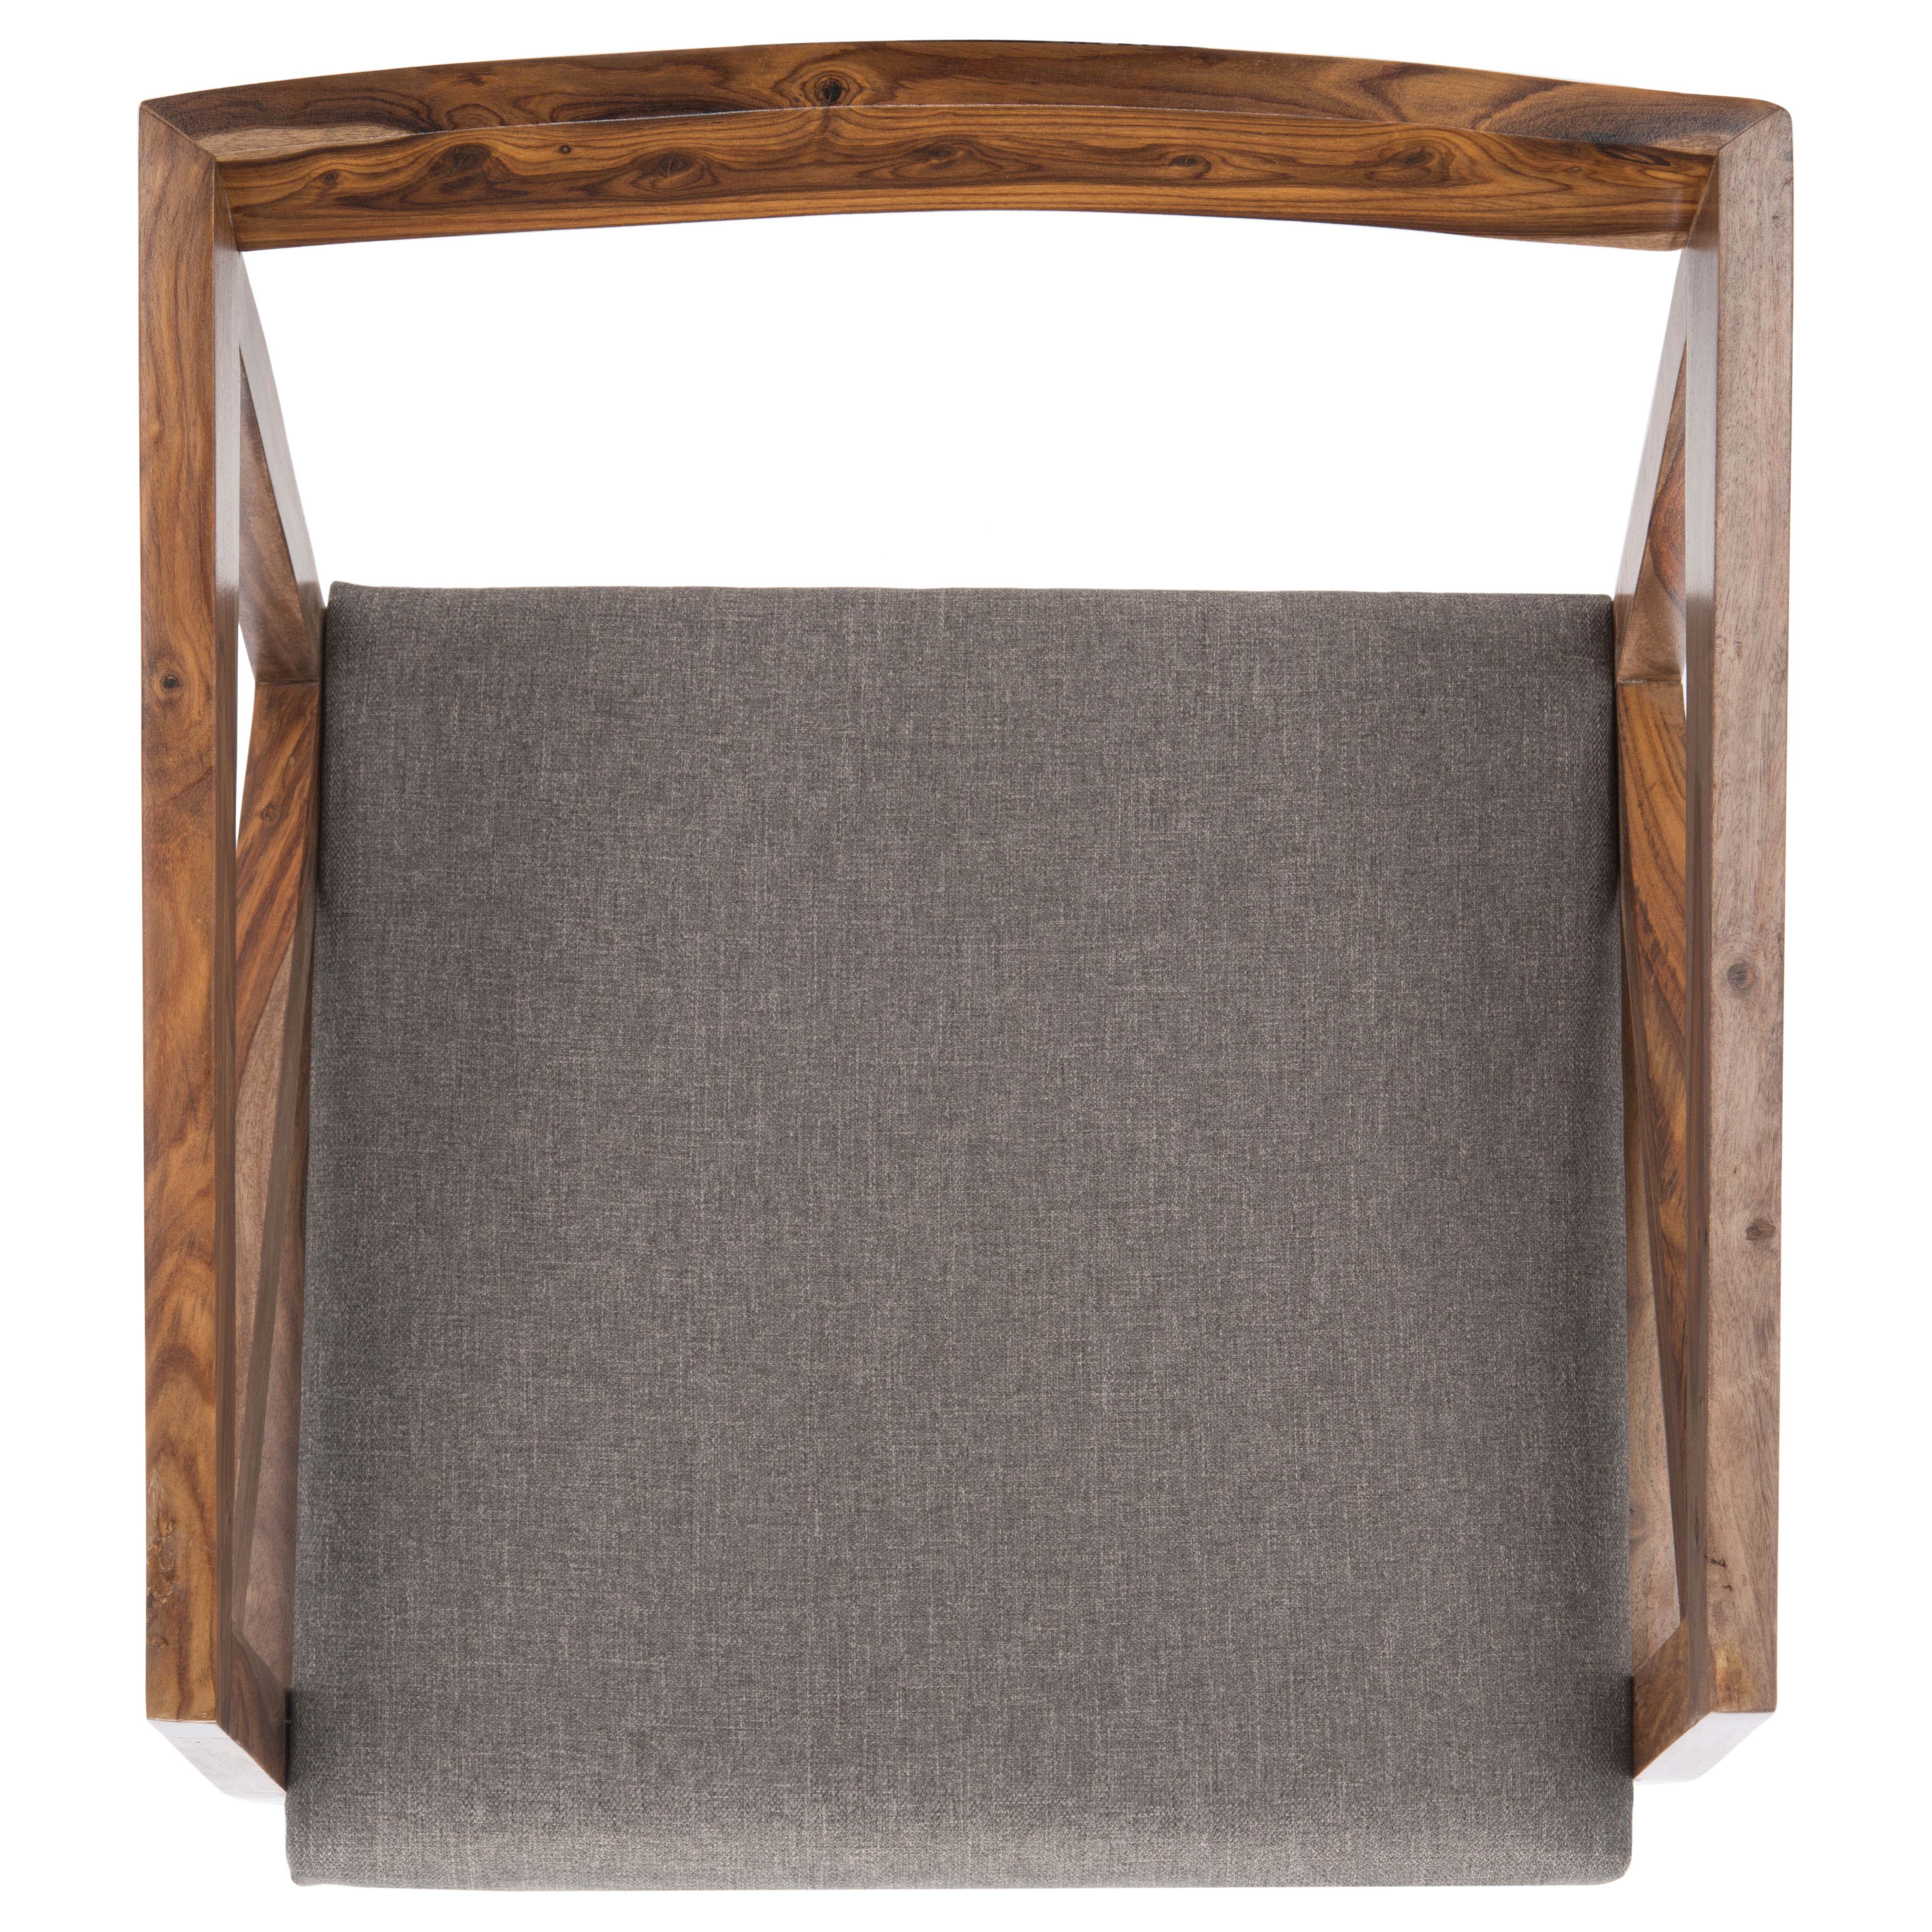 Safavieh Couture Khloe Wood Dining Chair - Natural / Grey